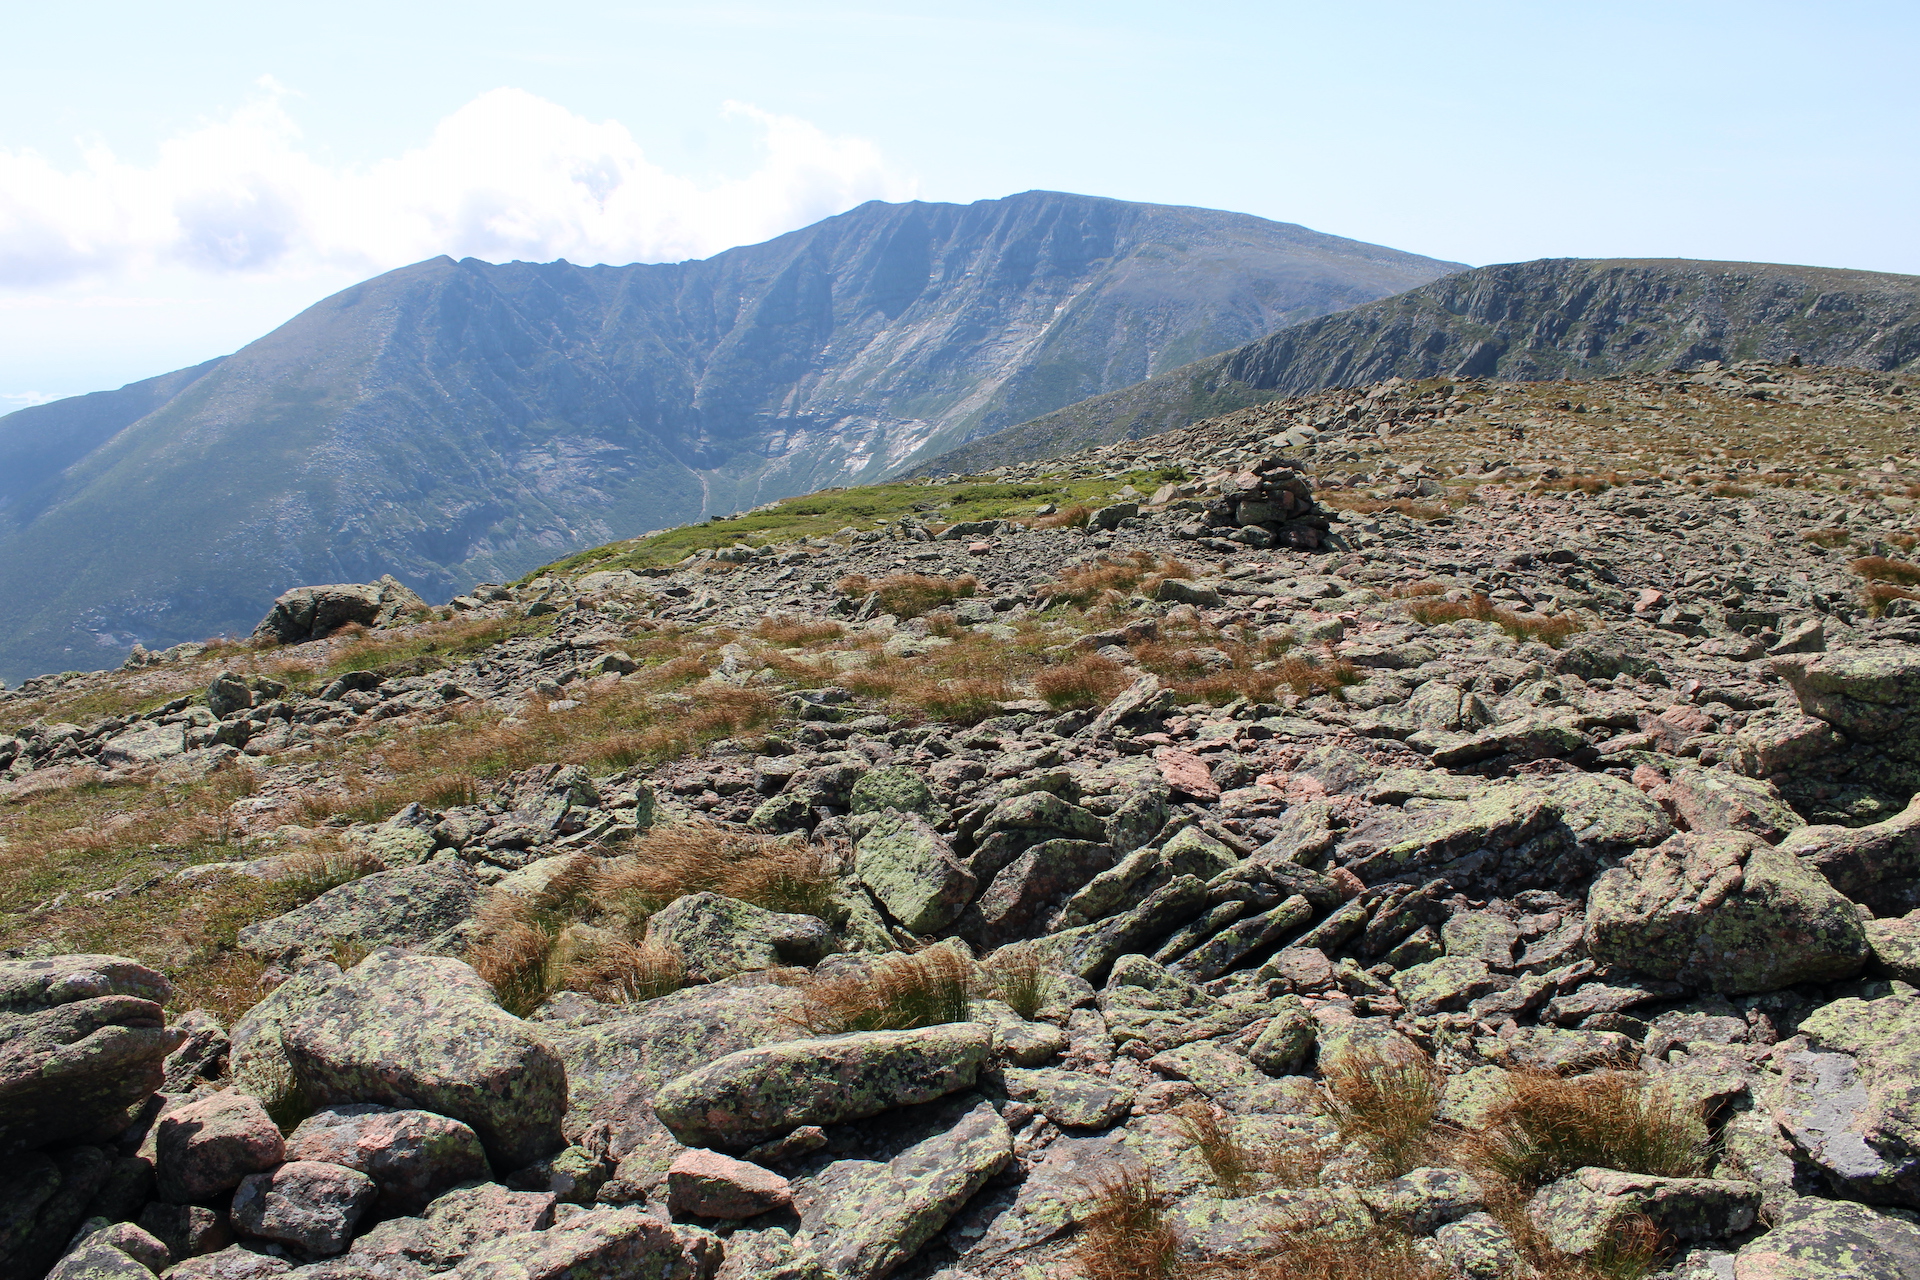 View of boulder field and alpine vegetation (mostly small sedges tucked between the rocks) looking toward a taller mountain peak in the background.